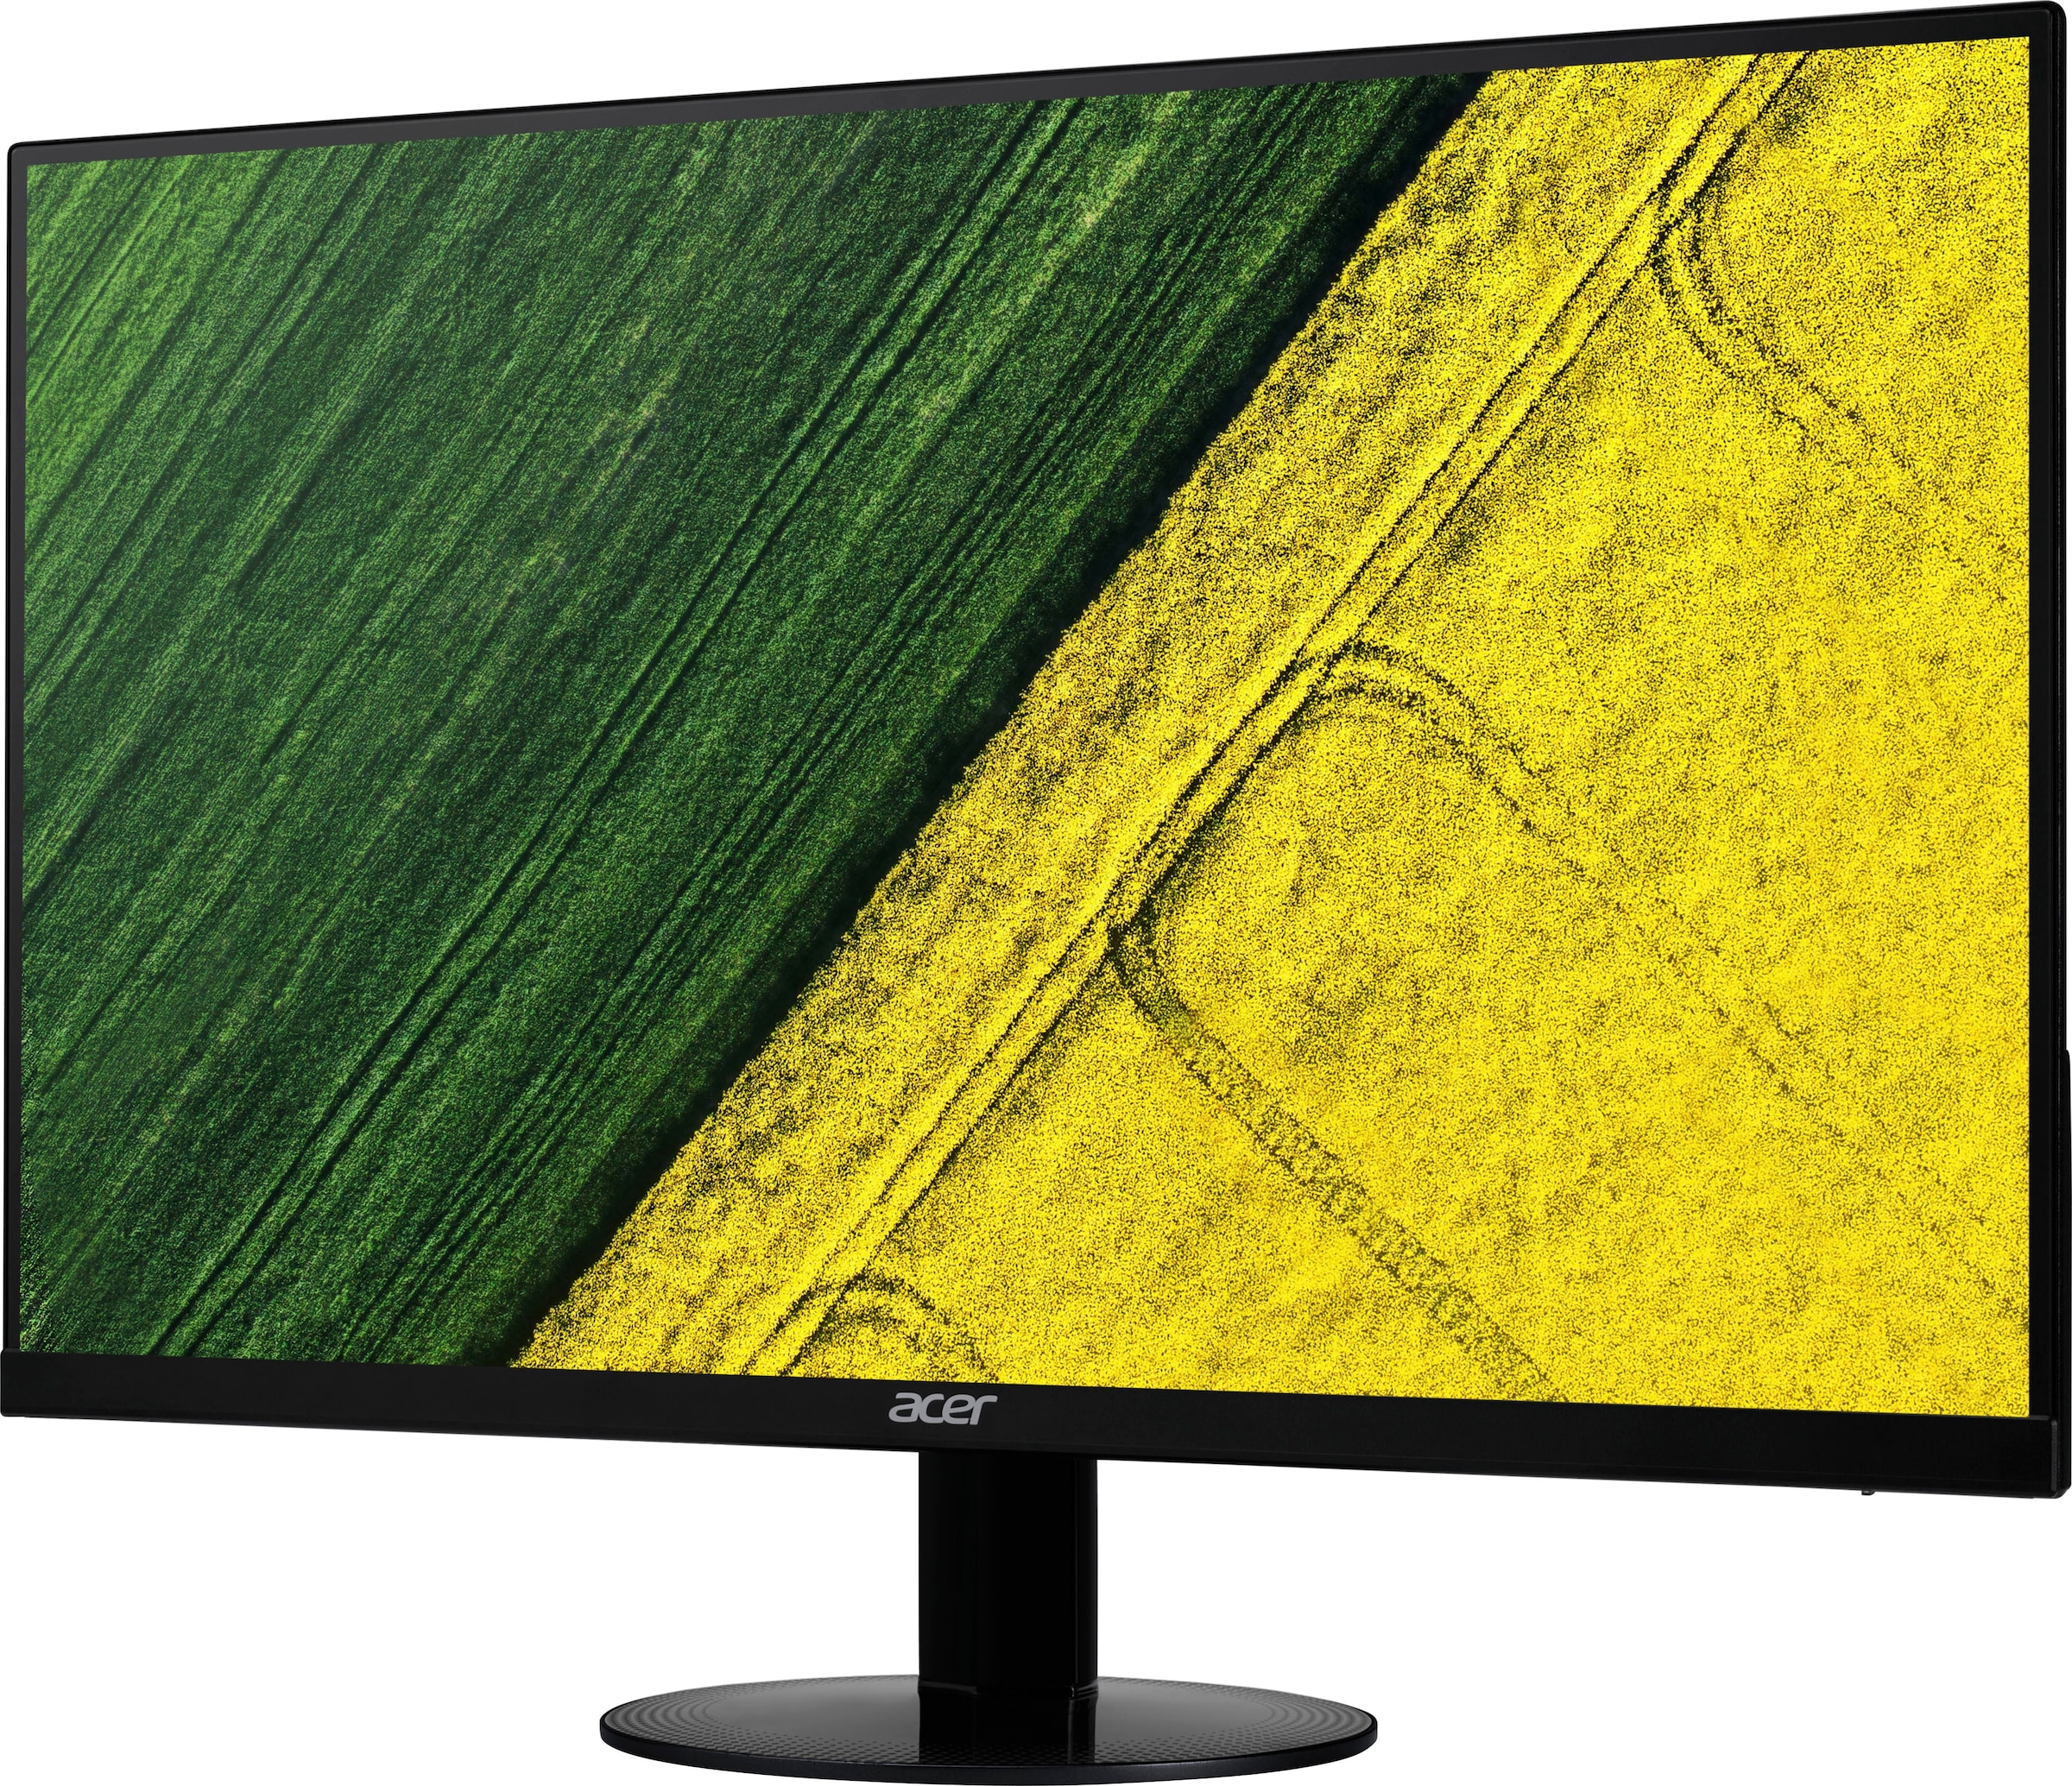 Acer LED-Monitor »SA270«, 69 cm/27 Zoll, 1920 x 1080 px, Full HD, 4 ms Reaktionszeit, 75 Hz